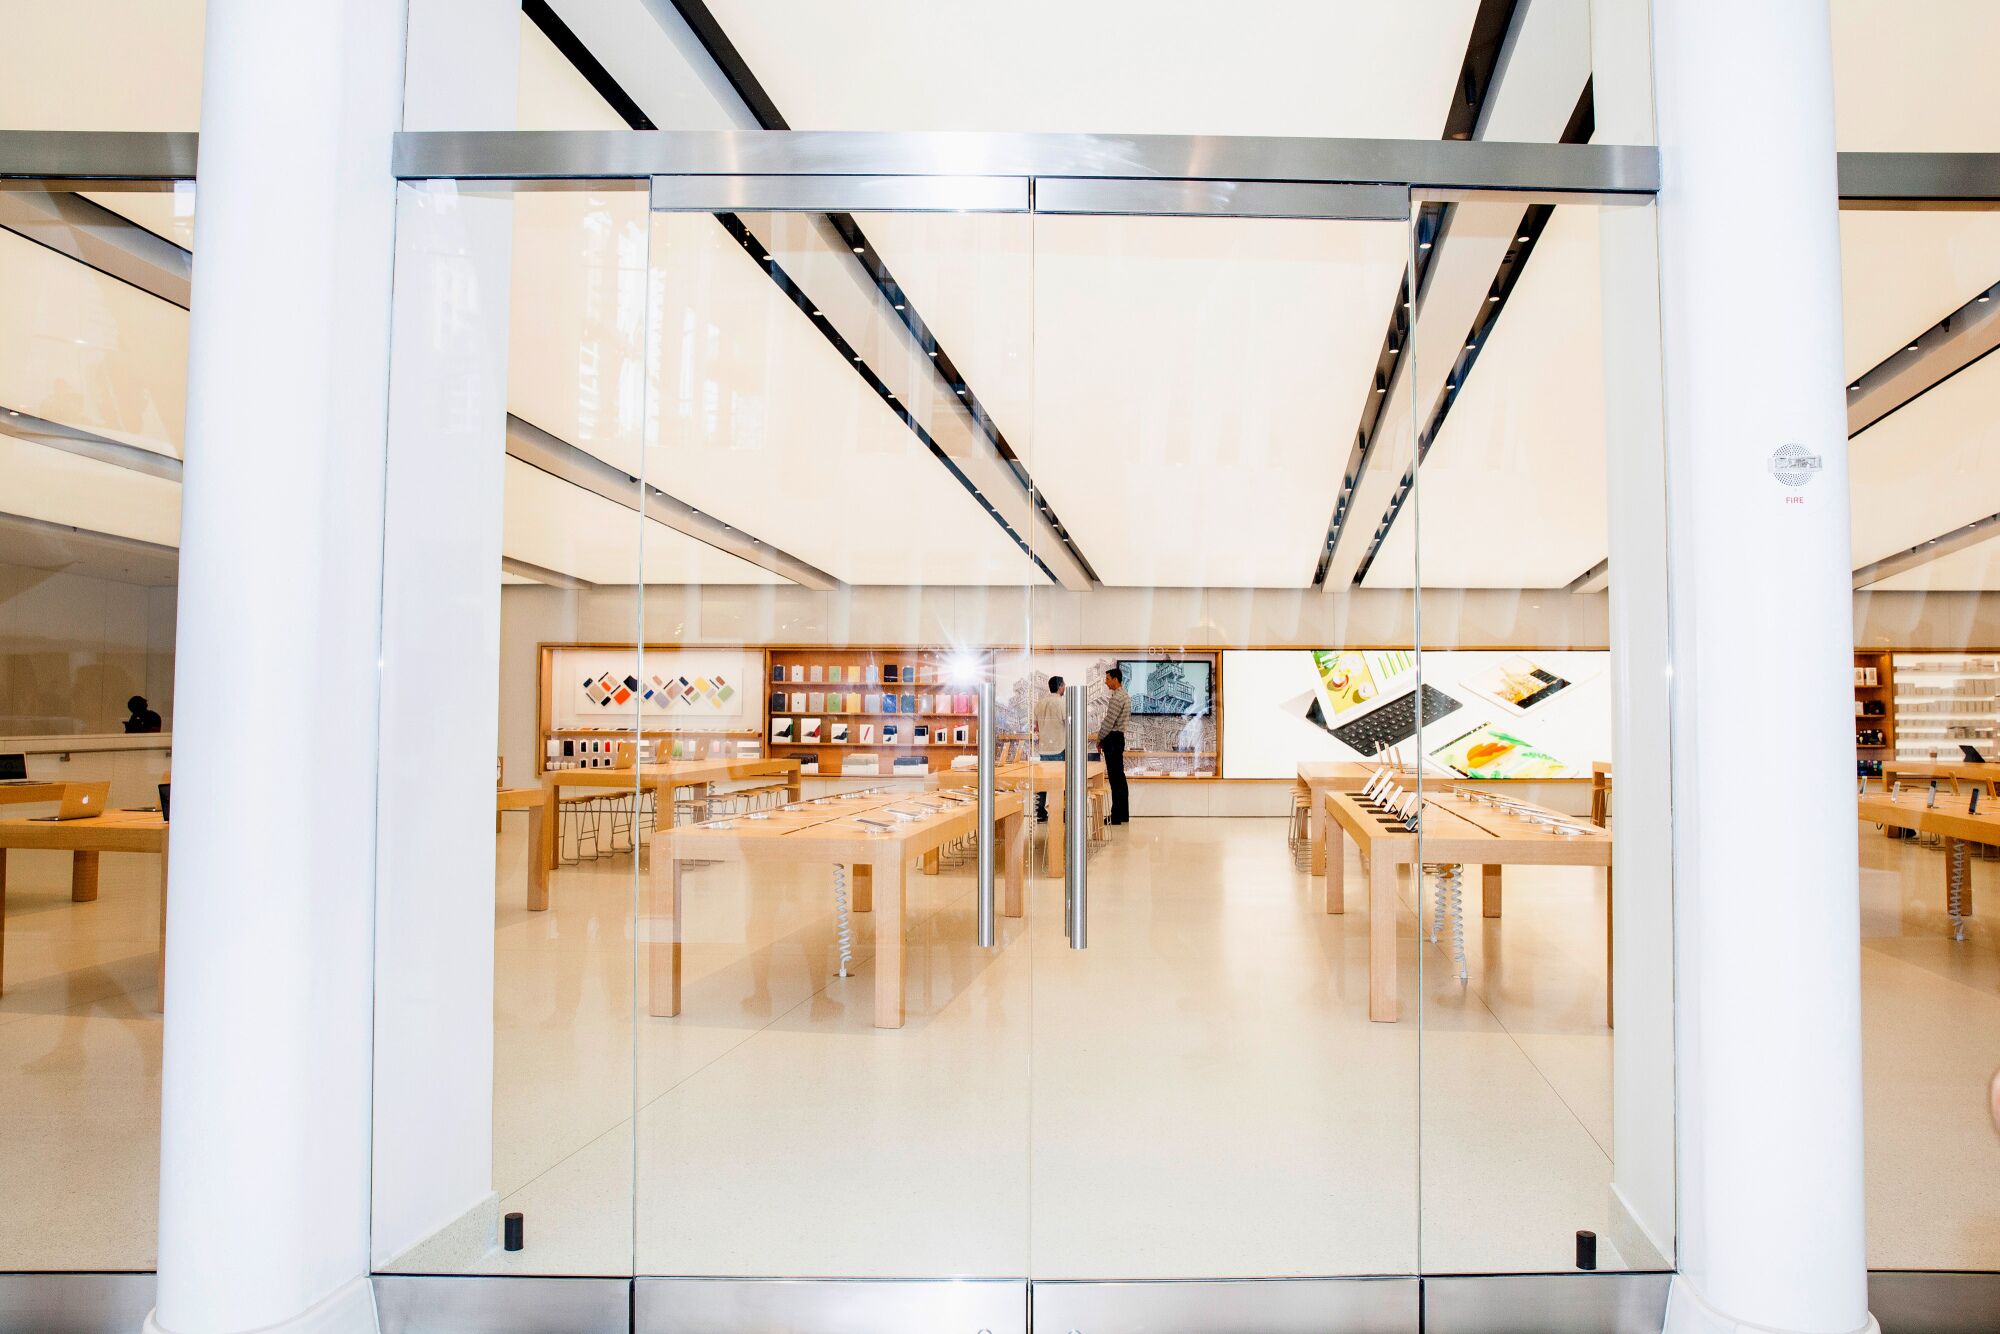 apple illegally interrogated nyc retail staff, us labor board rules